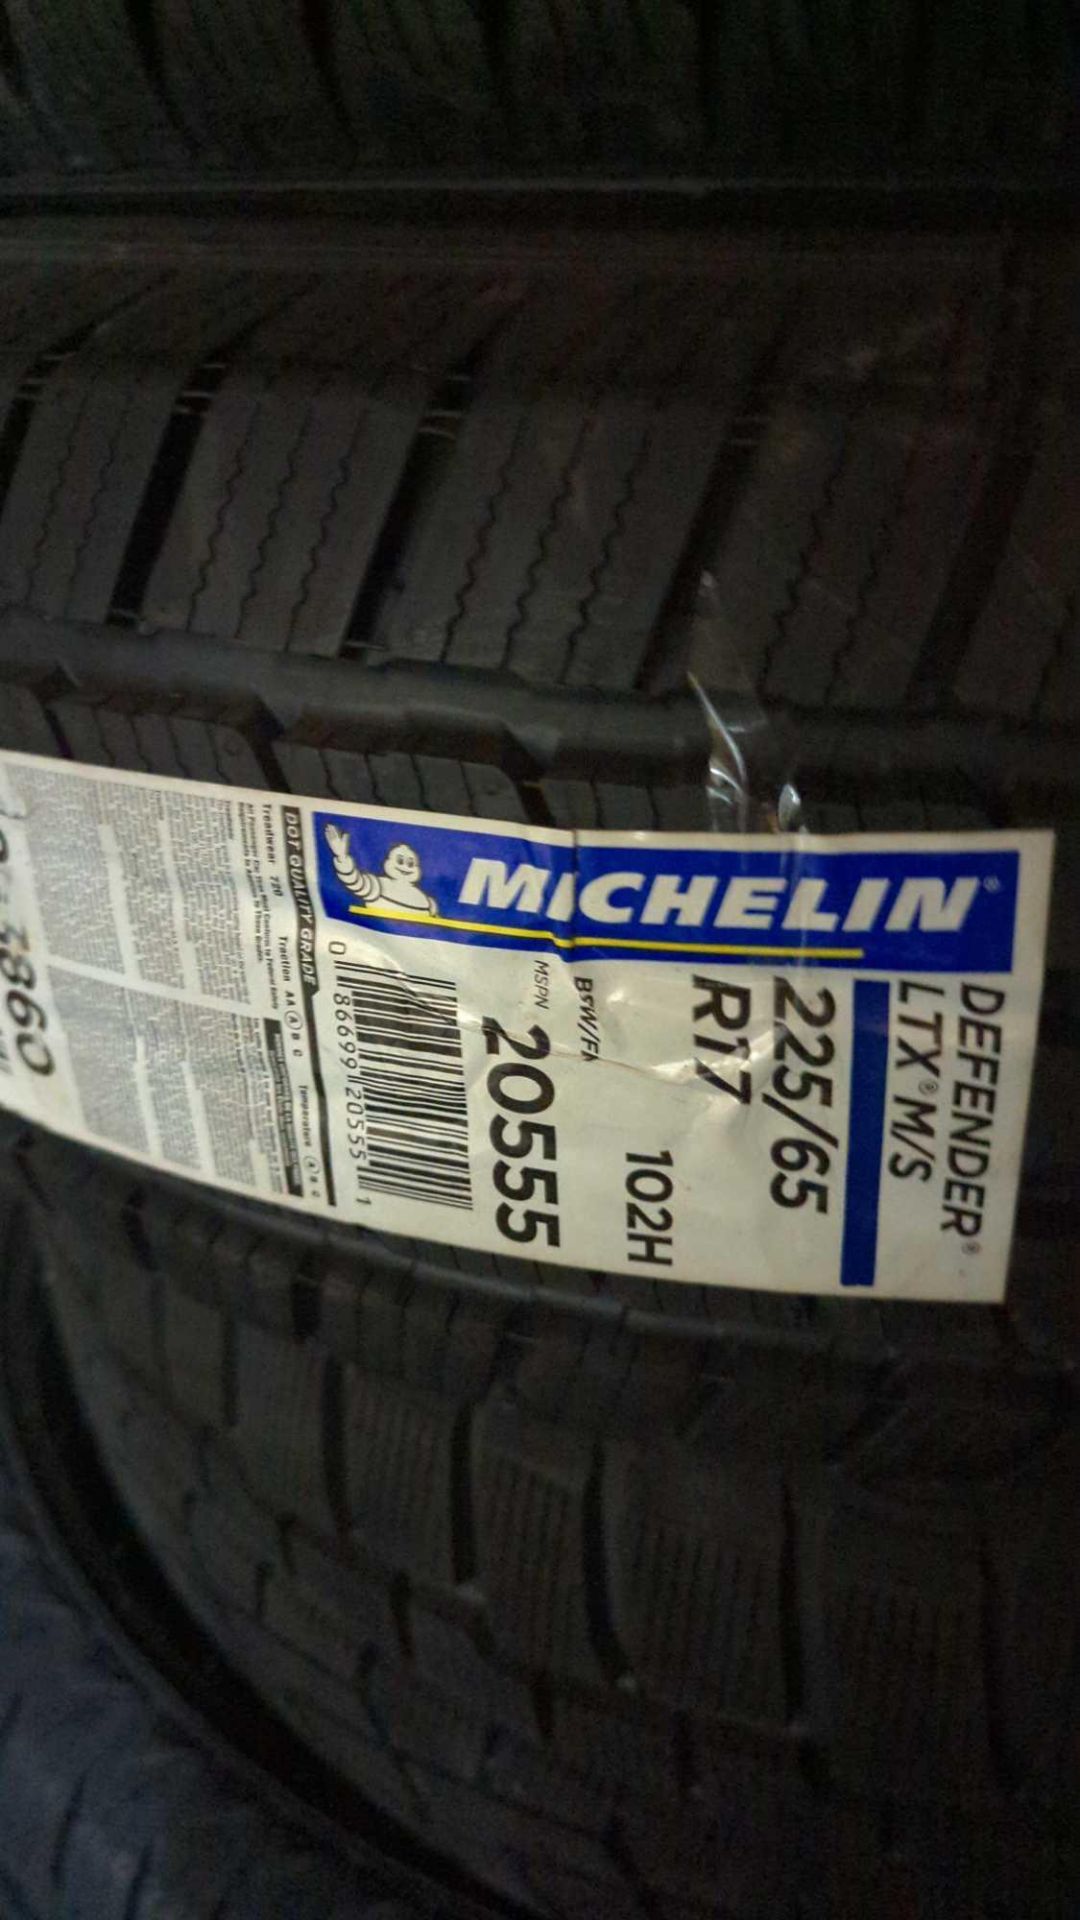 Semi Trailer of new Tires, approx 600 of them, - Image 10 of 18